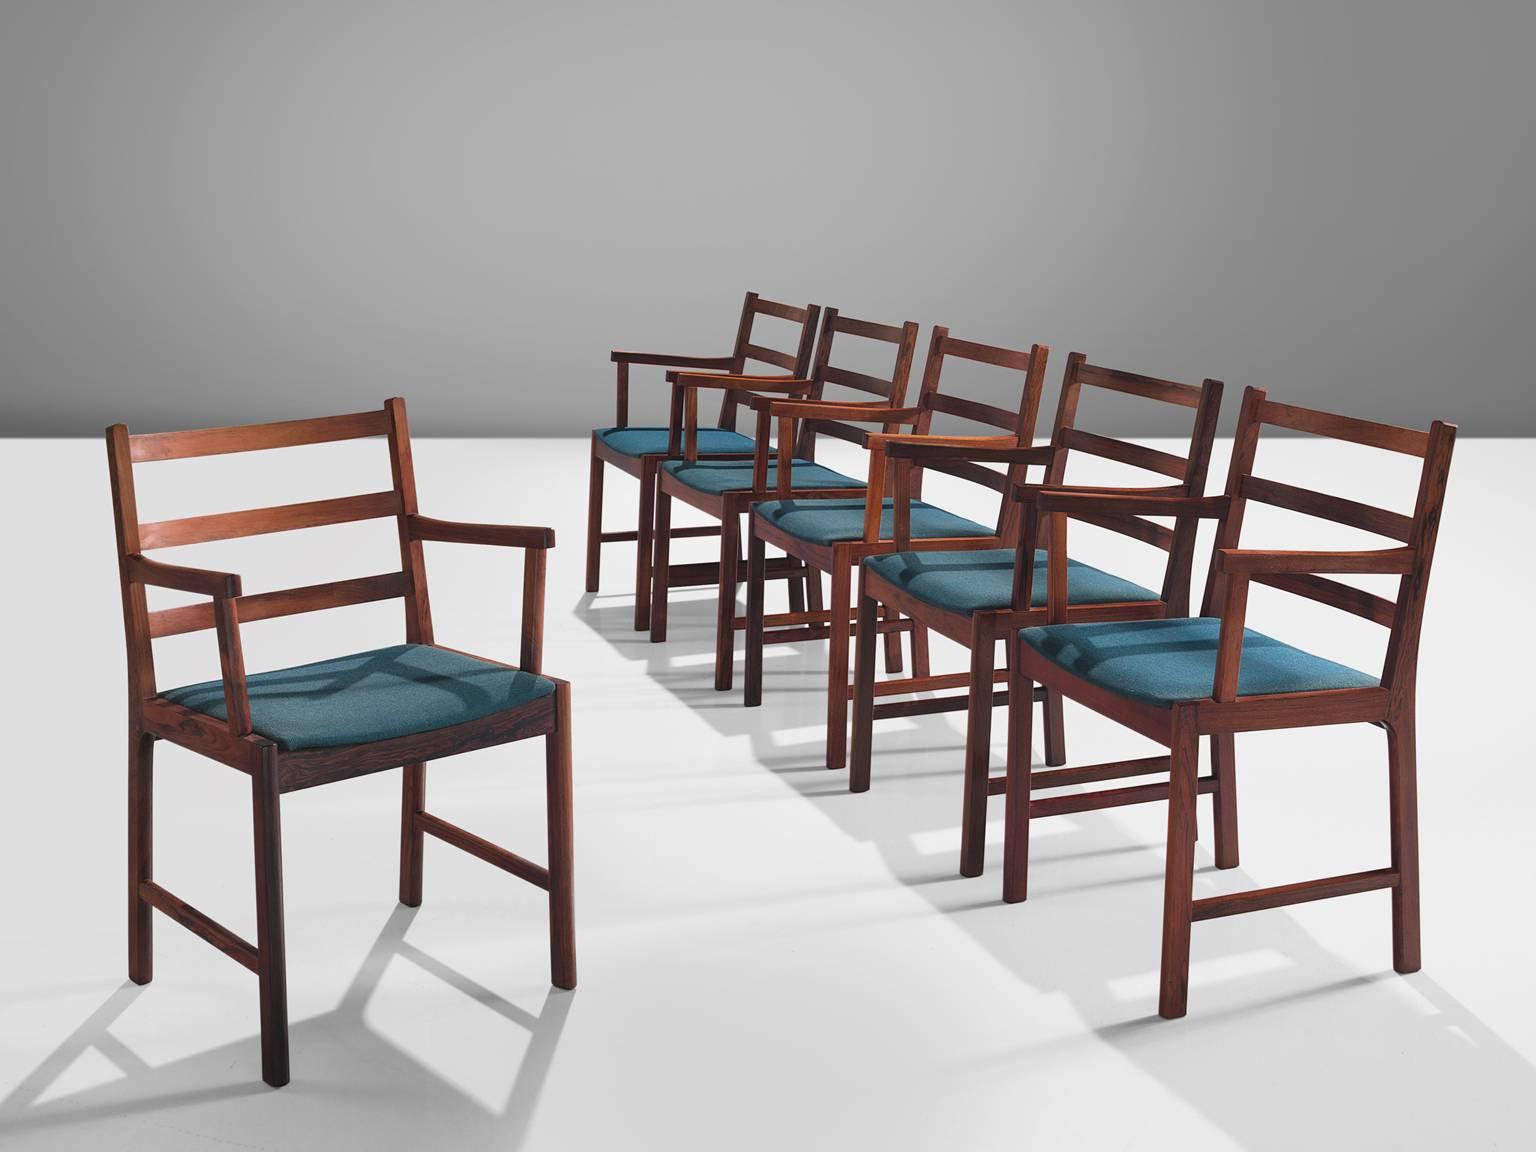 Set of six armchairs, rosewood and blue wool, Denmark, 1960s.

This set of rosewood chairs have a warm grained frame. The chairs are built up of a slatted back with three slats and a minimalist, clean frame. The warm color of the wood combines great